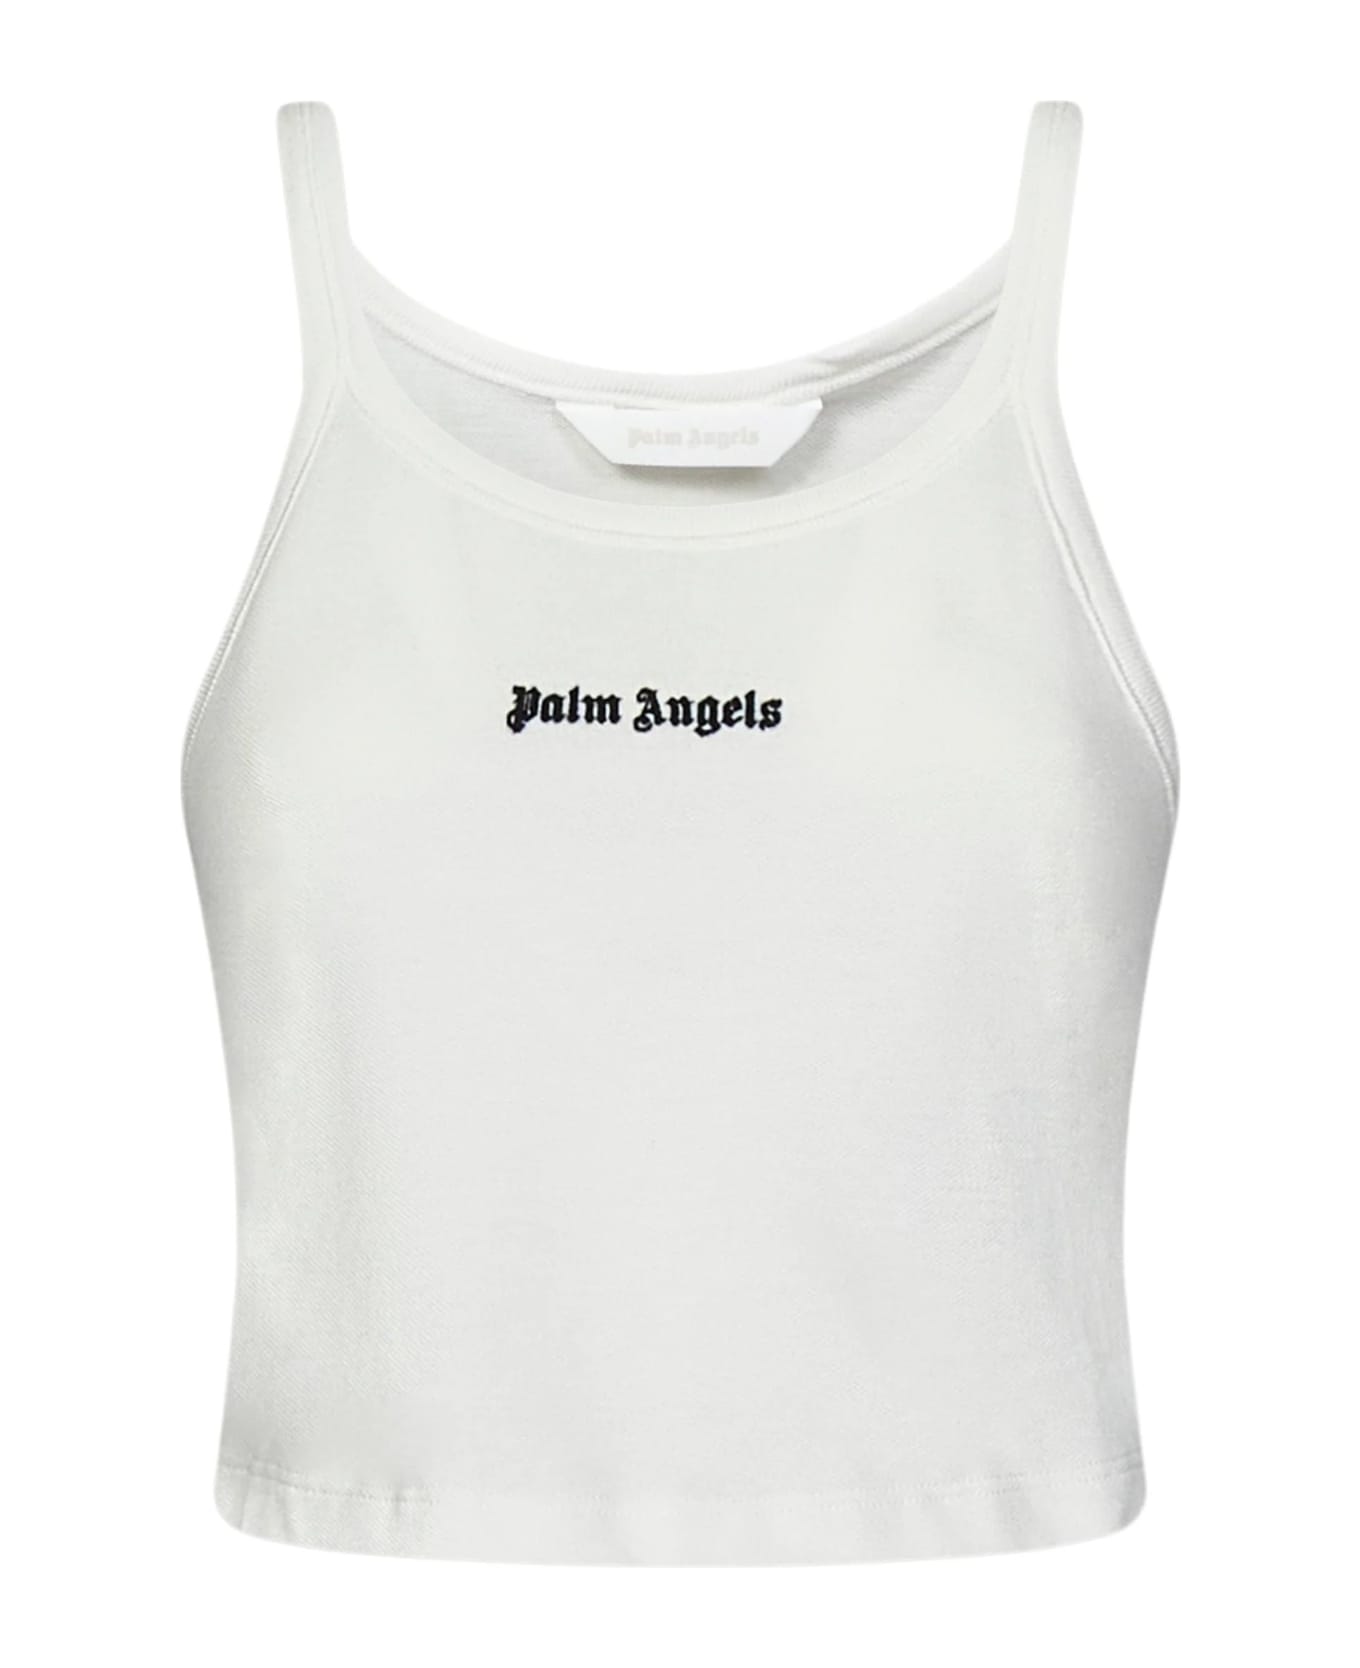 Palm Angels Off-white Cotton Tank Top - White